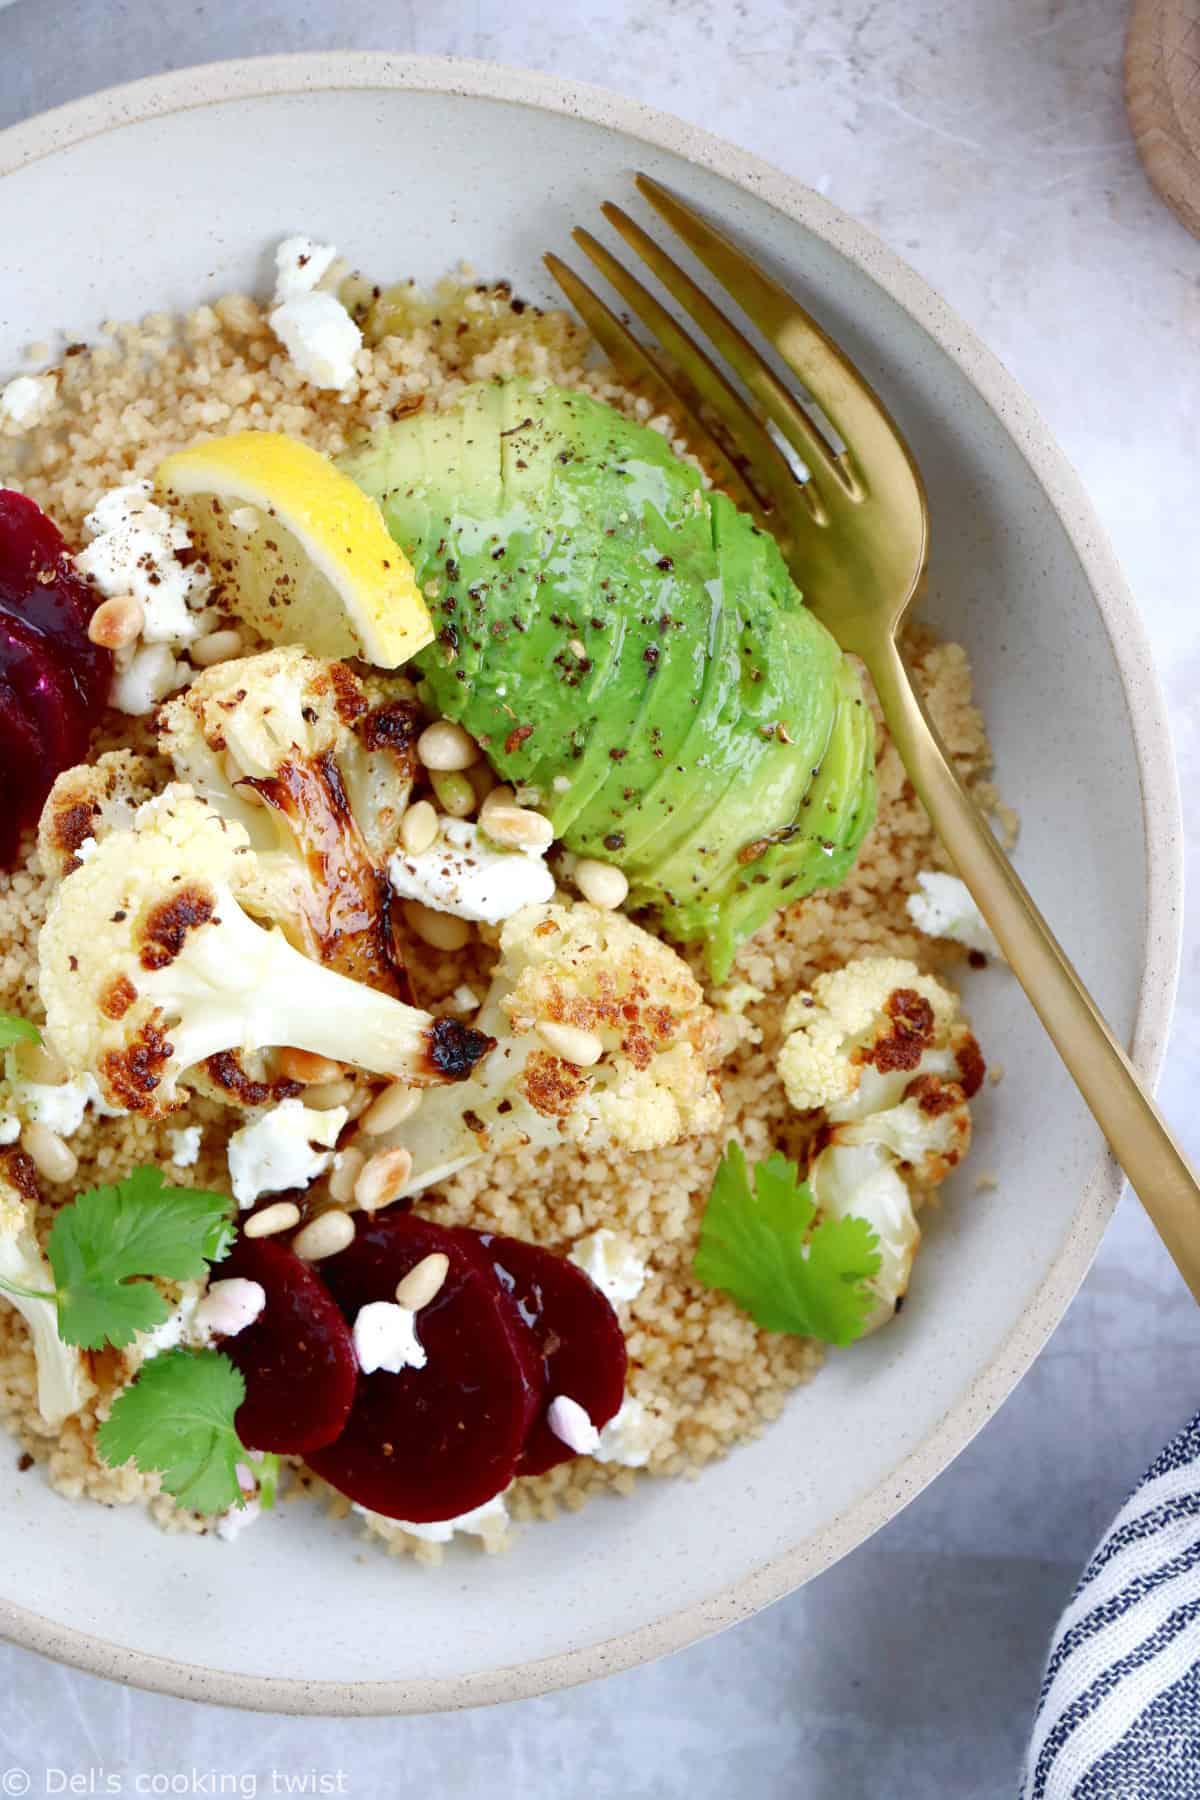 Avocado, beet and roasted cauliflower bowl with goat cheese is a simple healthy and nourishing meal, halfway between a salad and a warm bowl.